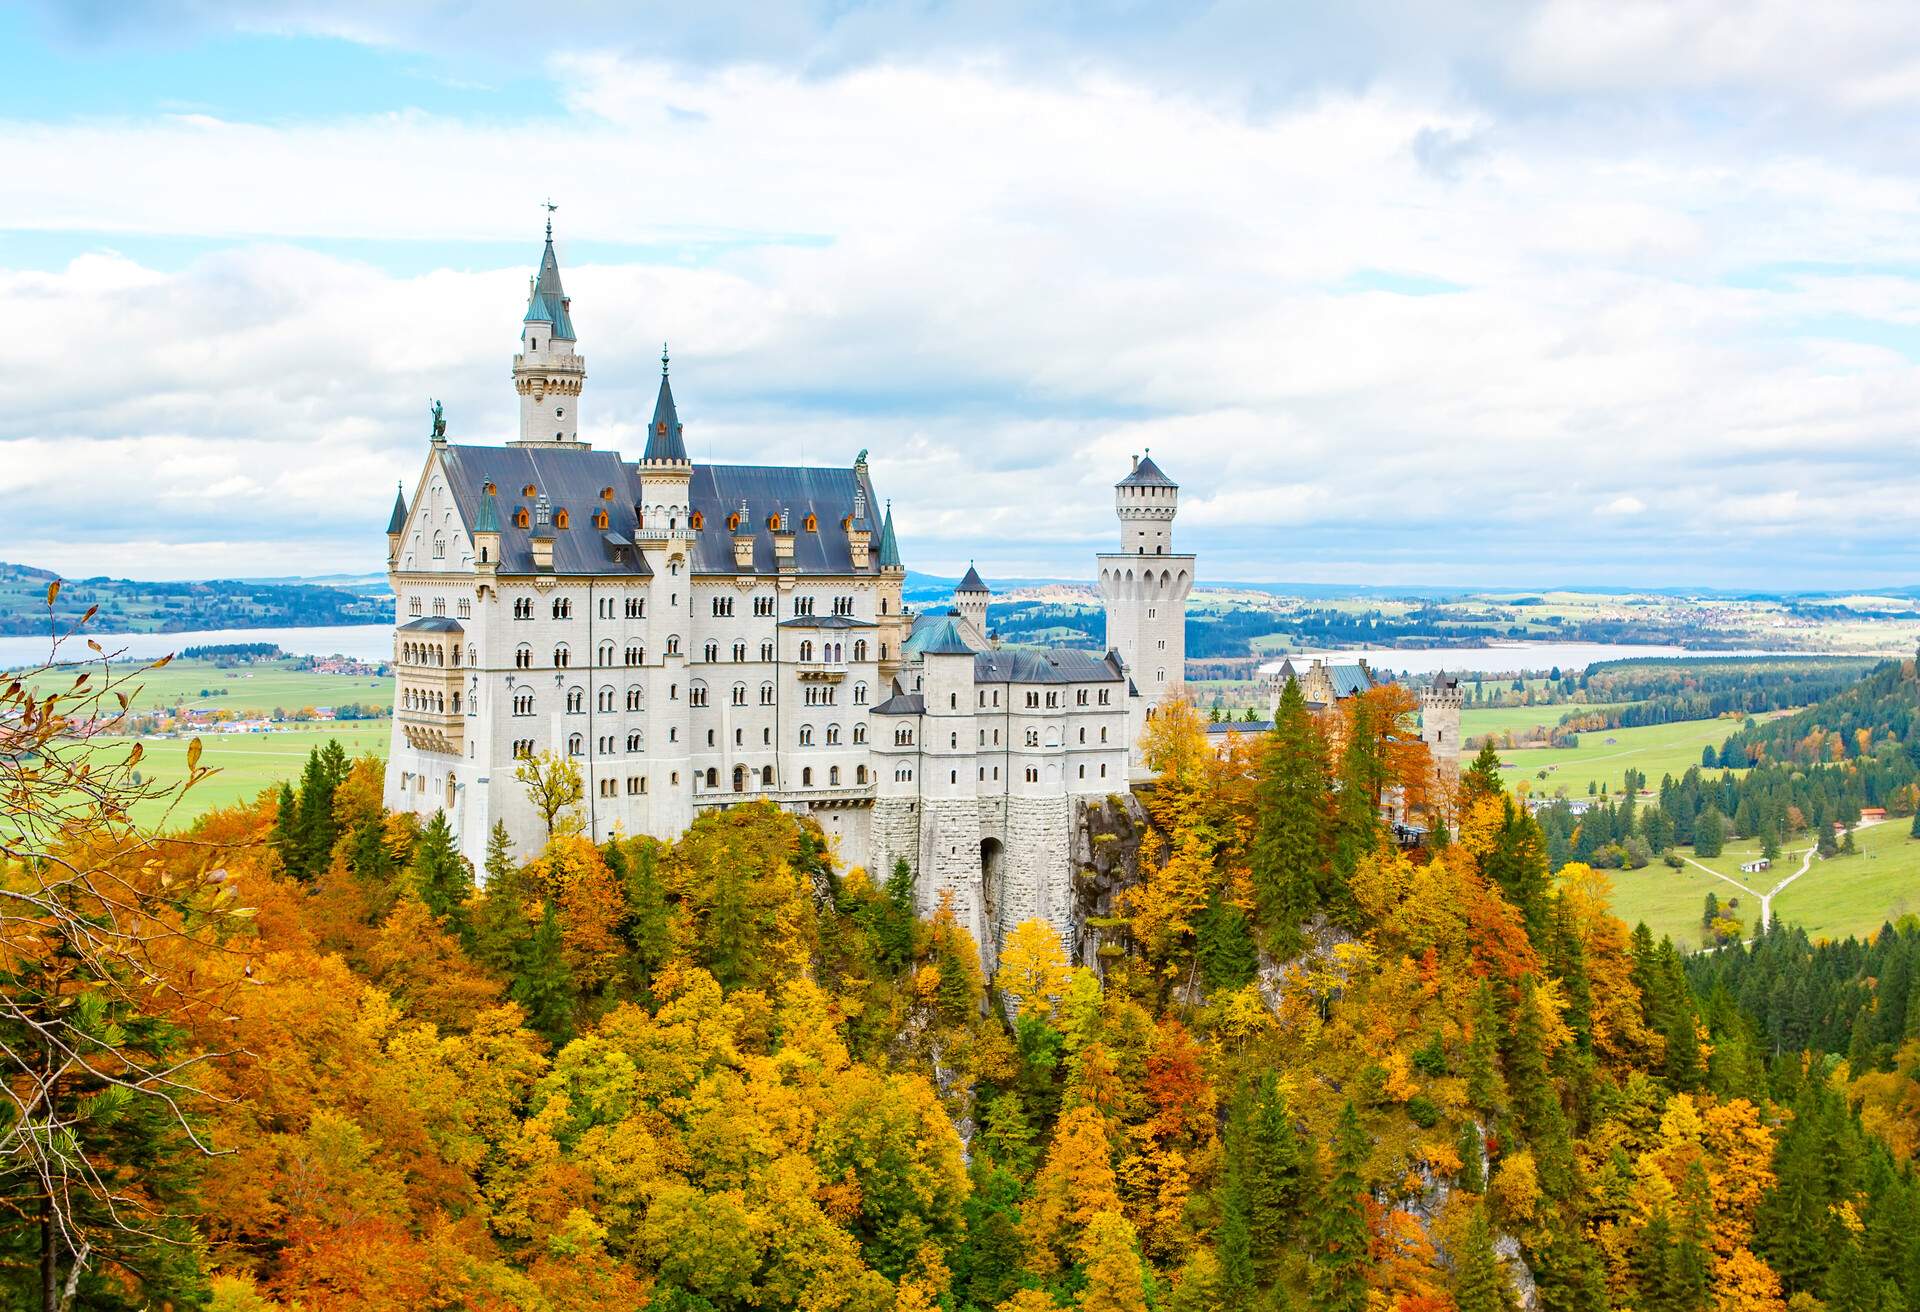 Neuschwanstein Castle, Germany. View of the tourist attraction surrounded by autumn colors during fall